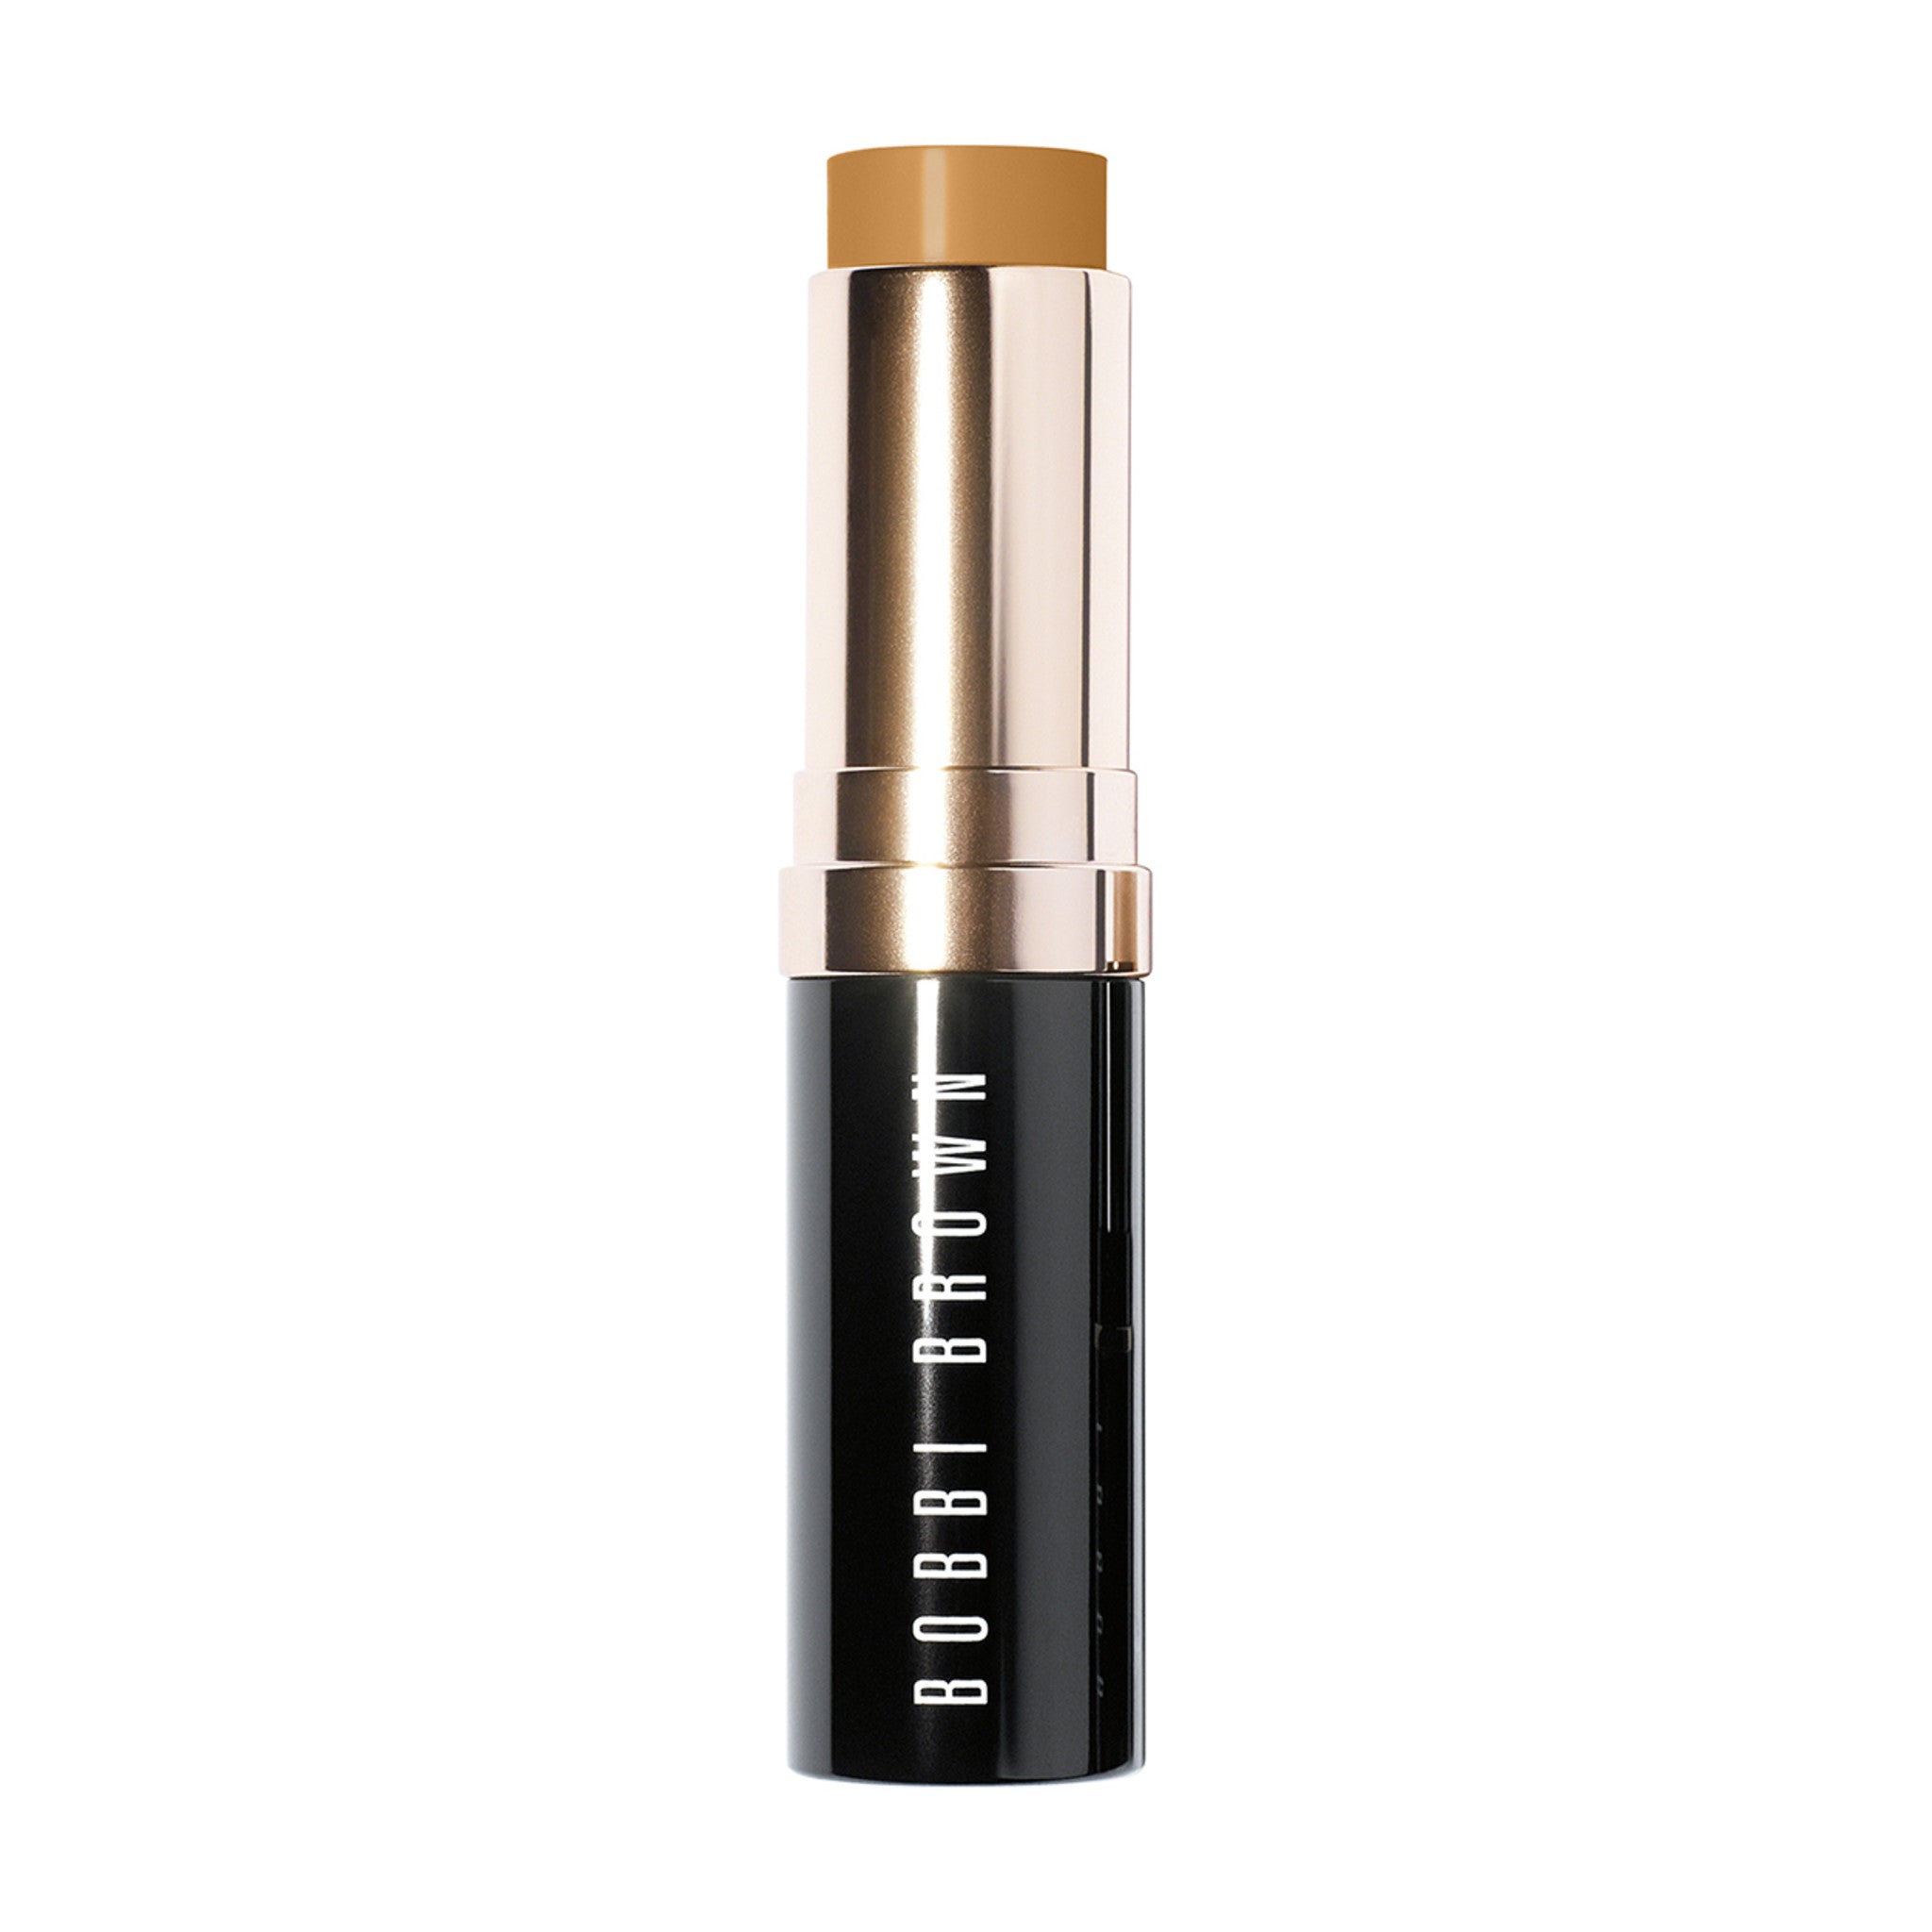 Bobbi Brown Skin Foundation Stick Color/Shade variant: Honey main image. This product is in the color nude, for medium warm golden complexions